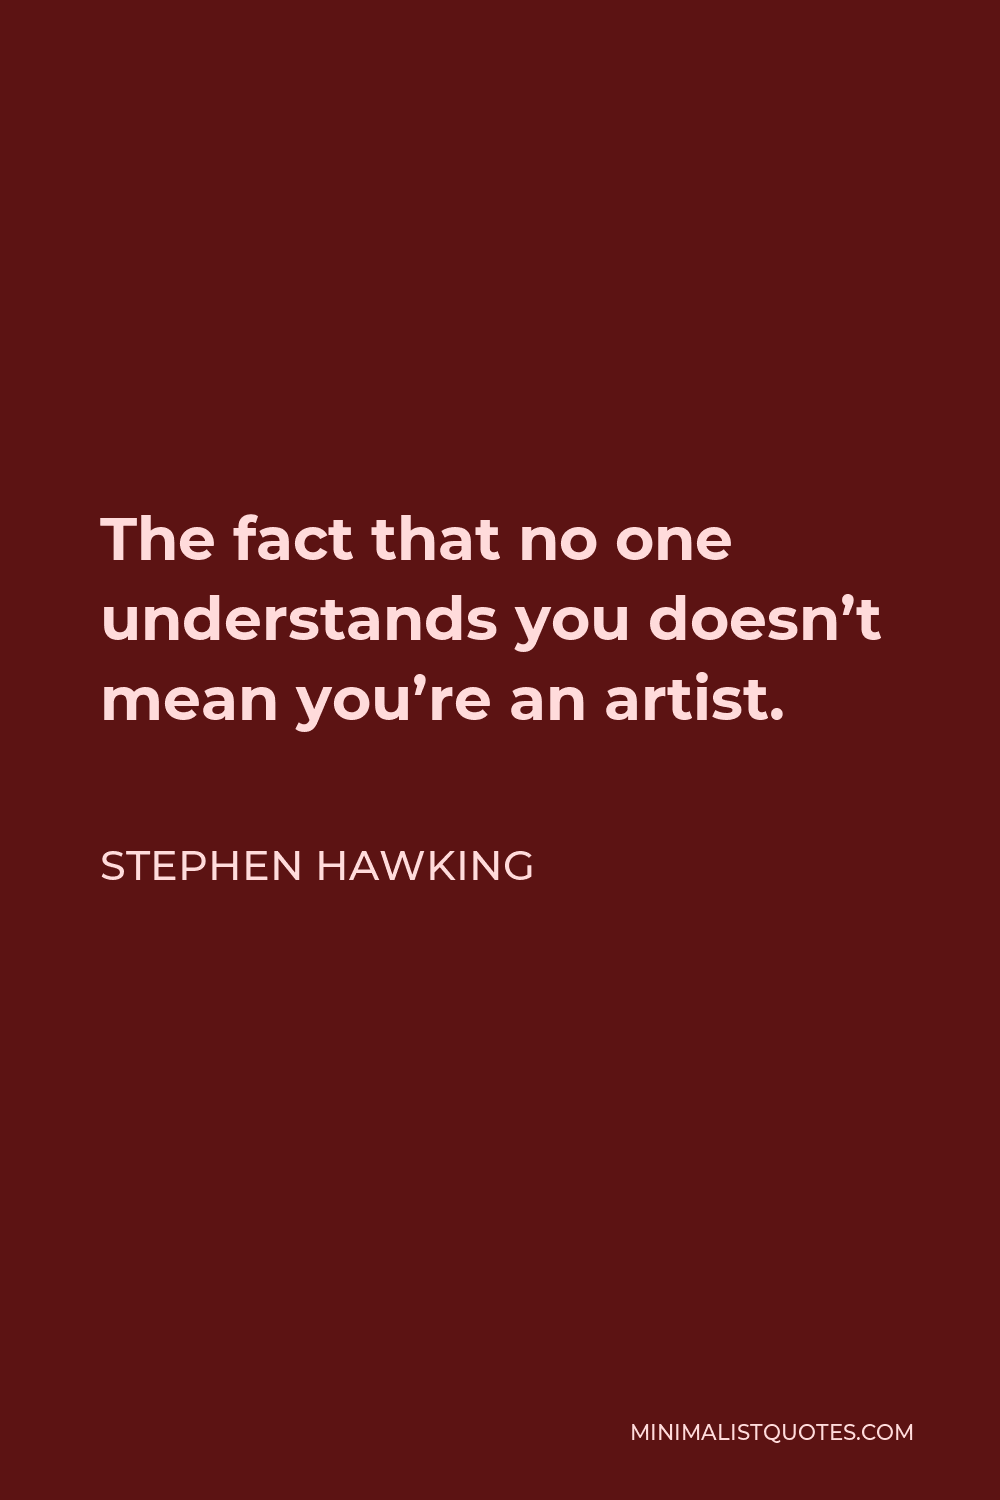 Stephen Hawking Quote - The fact that no one understands you doesn’t mean you’re an artist.